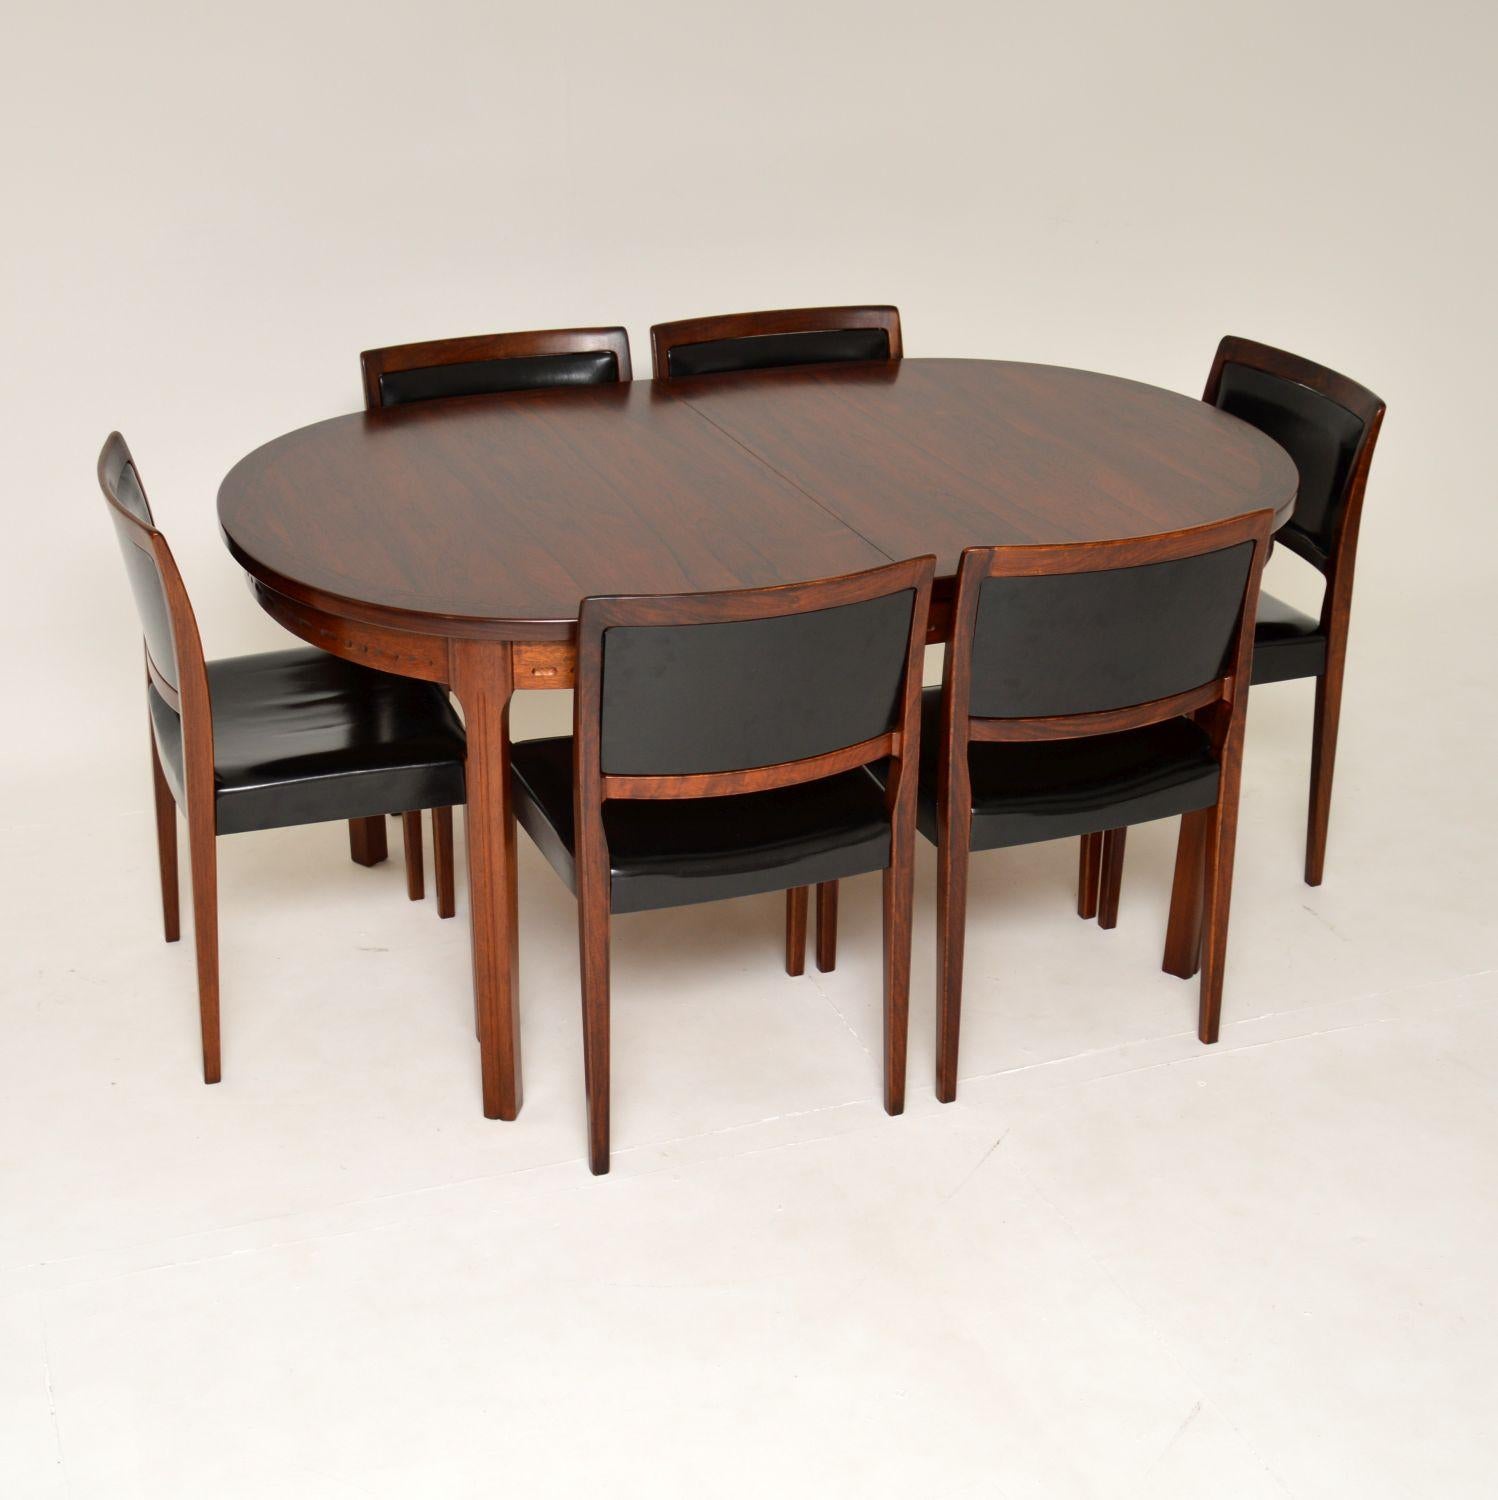 An excellent vintage Swedish dining table and chairs. They were designed by Nils Jonsson, and were made in Sweden by Troeds in the 1960’s.
The quality is superb, this is a stunning set with a beautiful design. The chairs are solid wood with leather